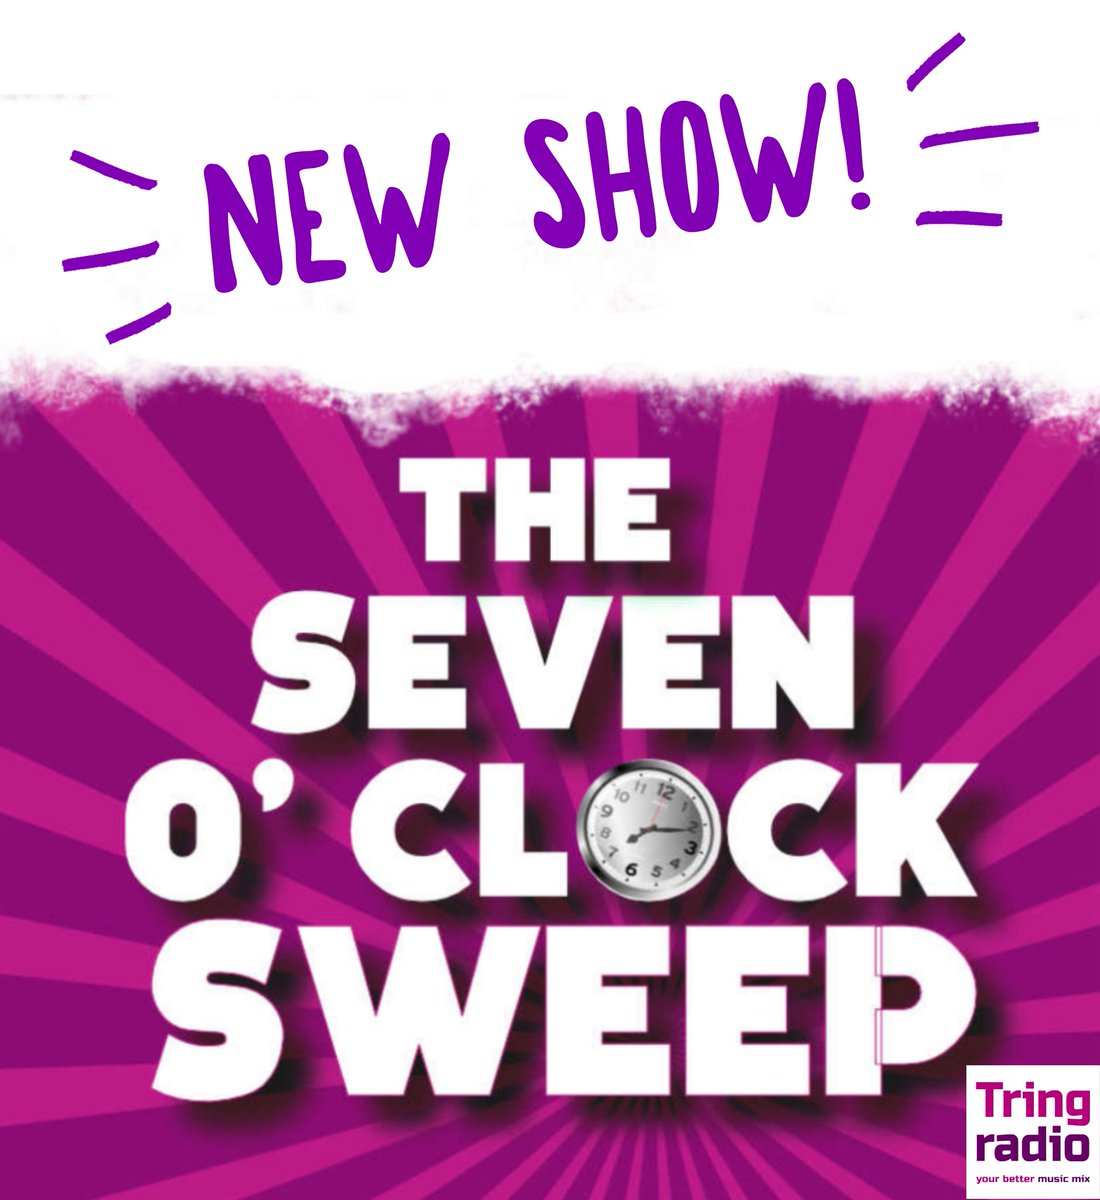 We’ve got a brand new show lined up for you tonight on @TringRadio! It’s the 7 O’Clock Sweep with all your favourite hits and new music in the mix! Join us on the free Tring Radio app #herts #bucks #beds #localradio #tringradio #music #hits #yourstation #musicmix